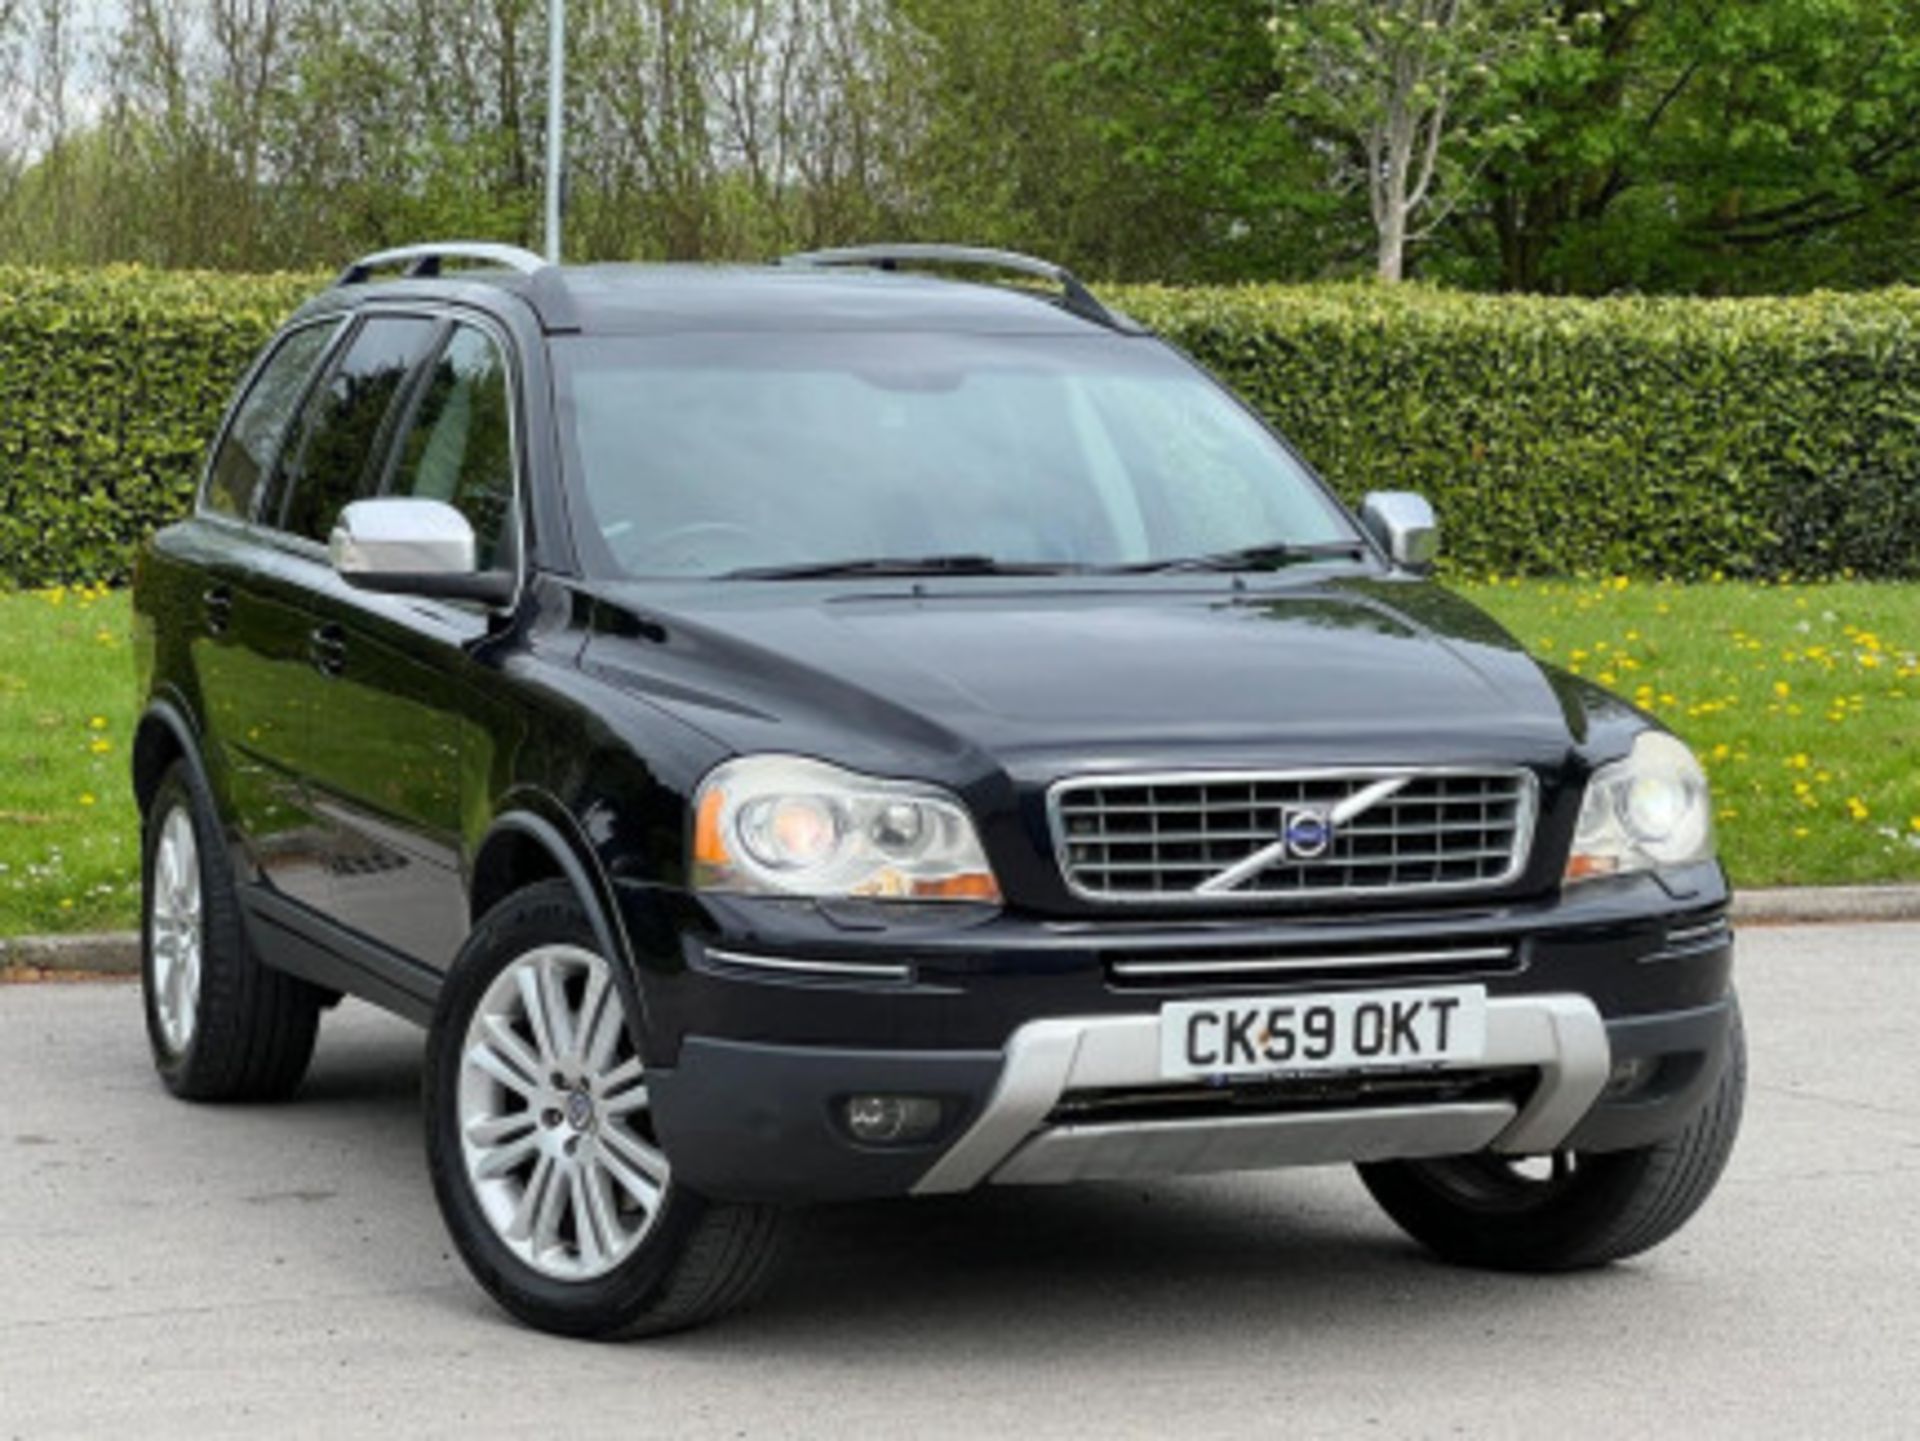 VOLVO XC90 2.4 D5 EXECUTIVE GEARTRONIC AWD, 5DR >>--NO VAT ON HAMMER--<< - Image 66 of 136